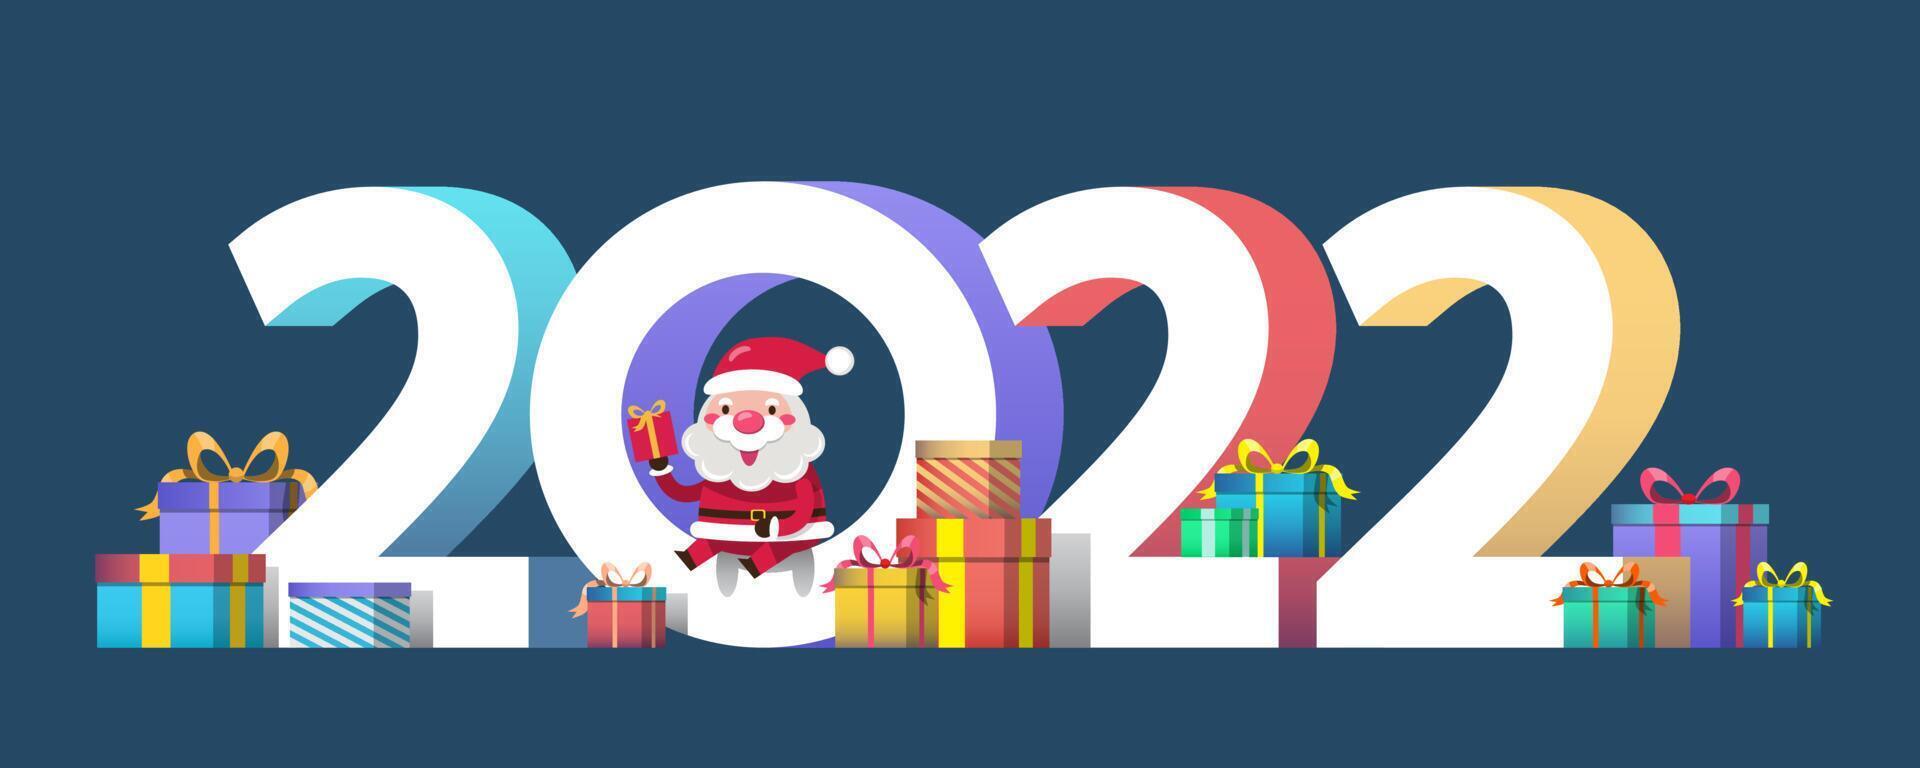 Happy New Year 2022 with a santa claus present a gift box for people on the world. vector